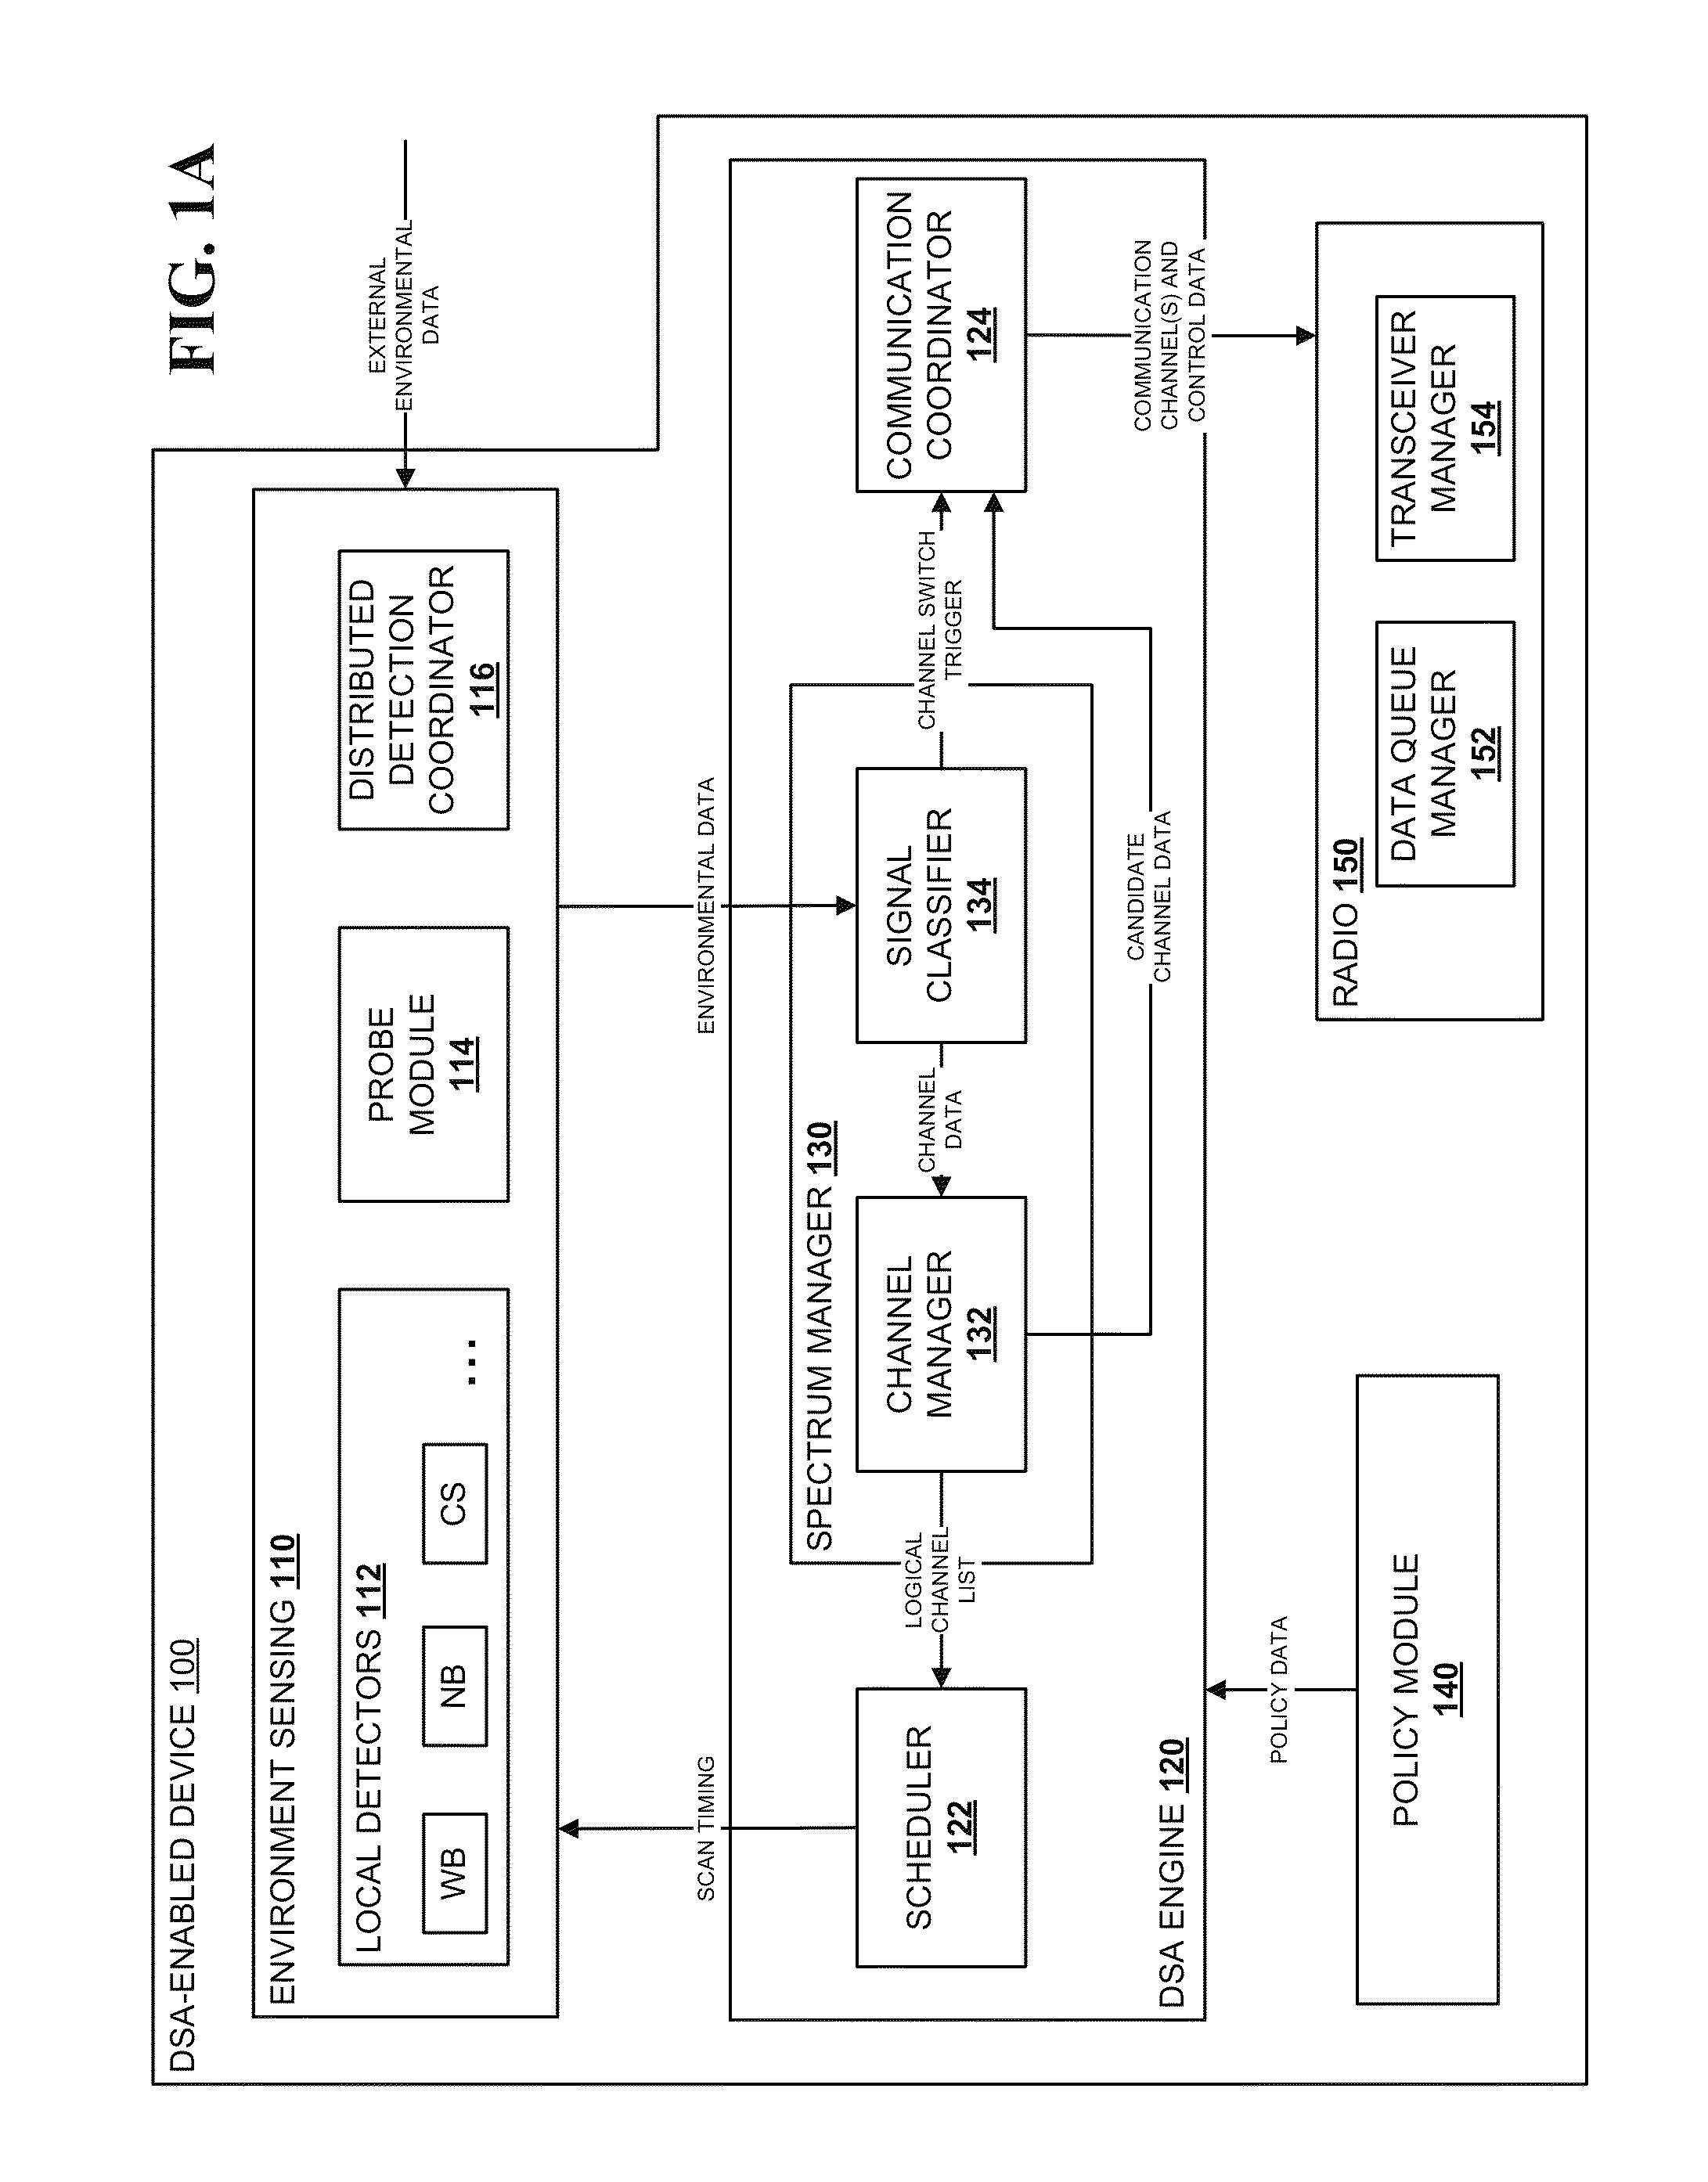 Method and system for dynamic spectrum access using specialty detectors and improved networking